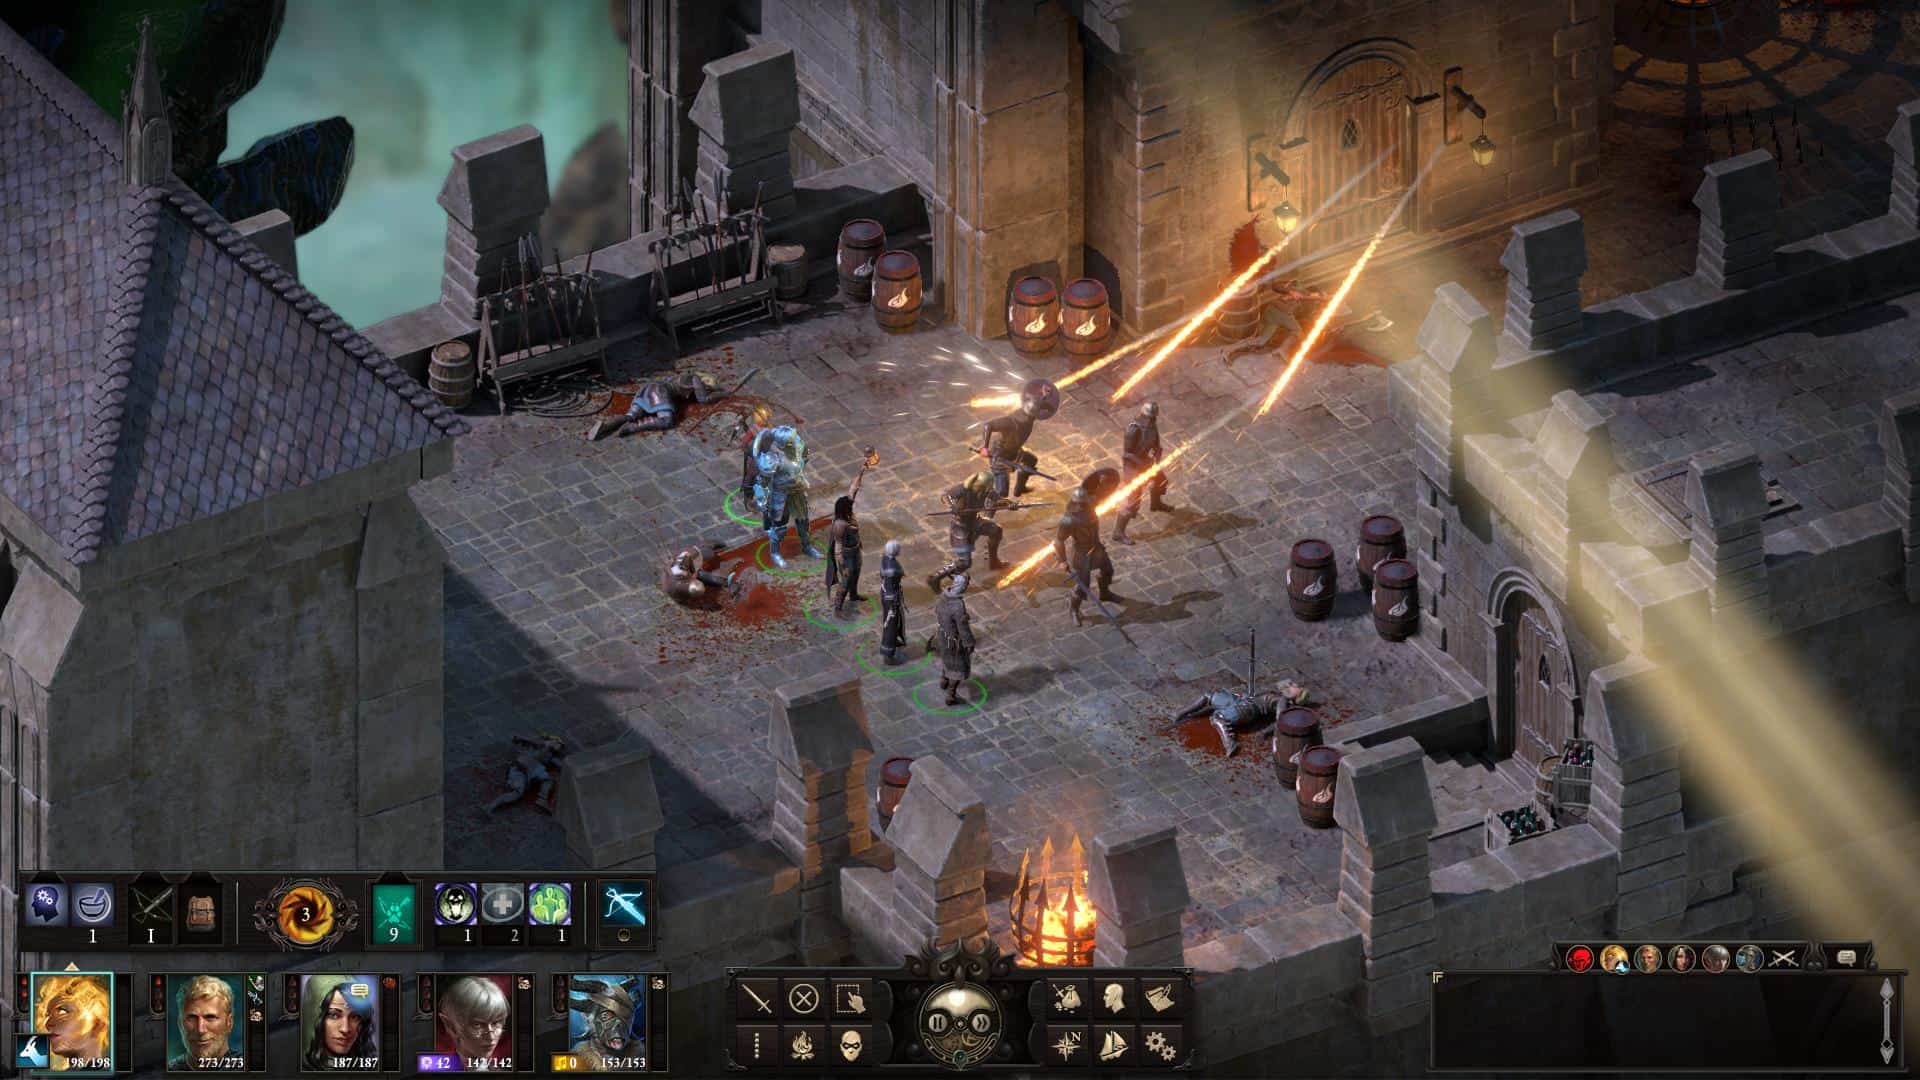 What I wouldn't give to see another Pillars of Eternity